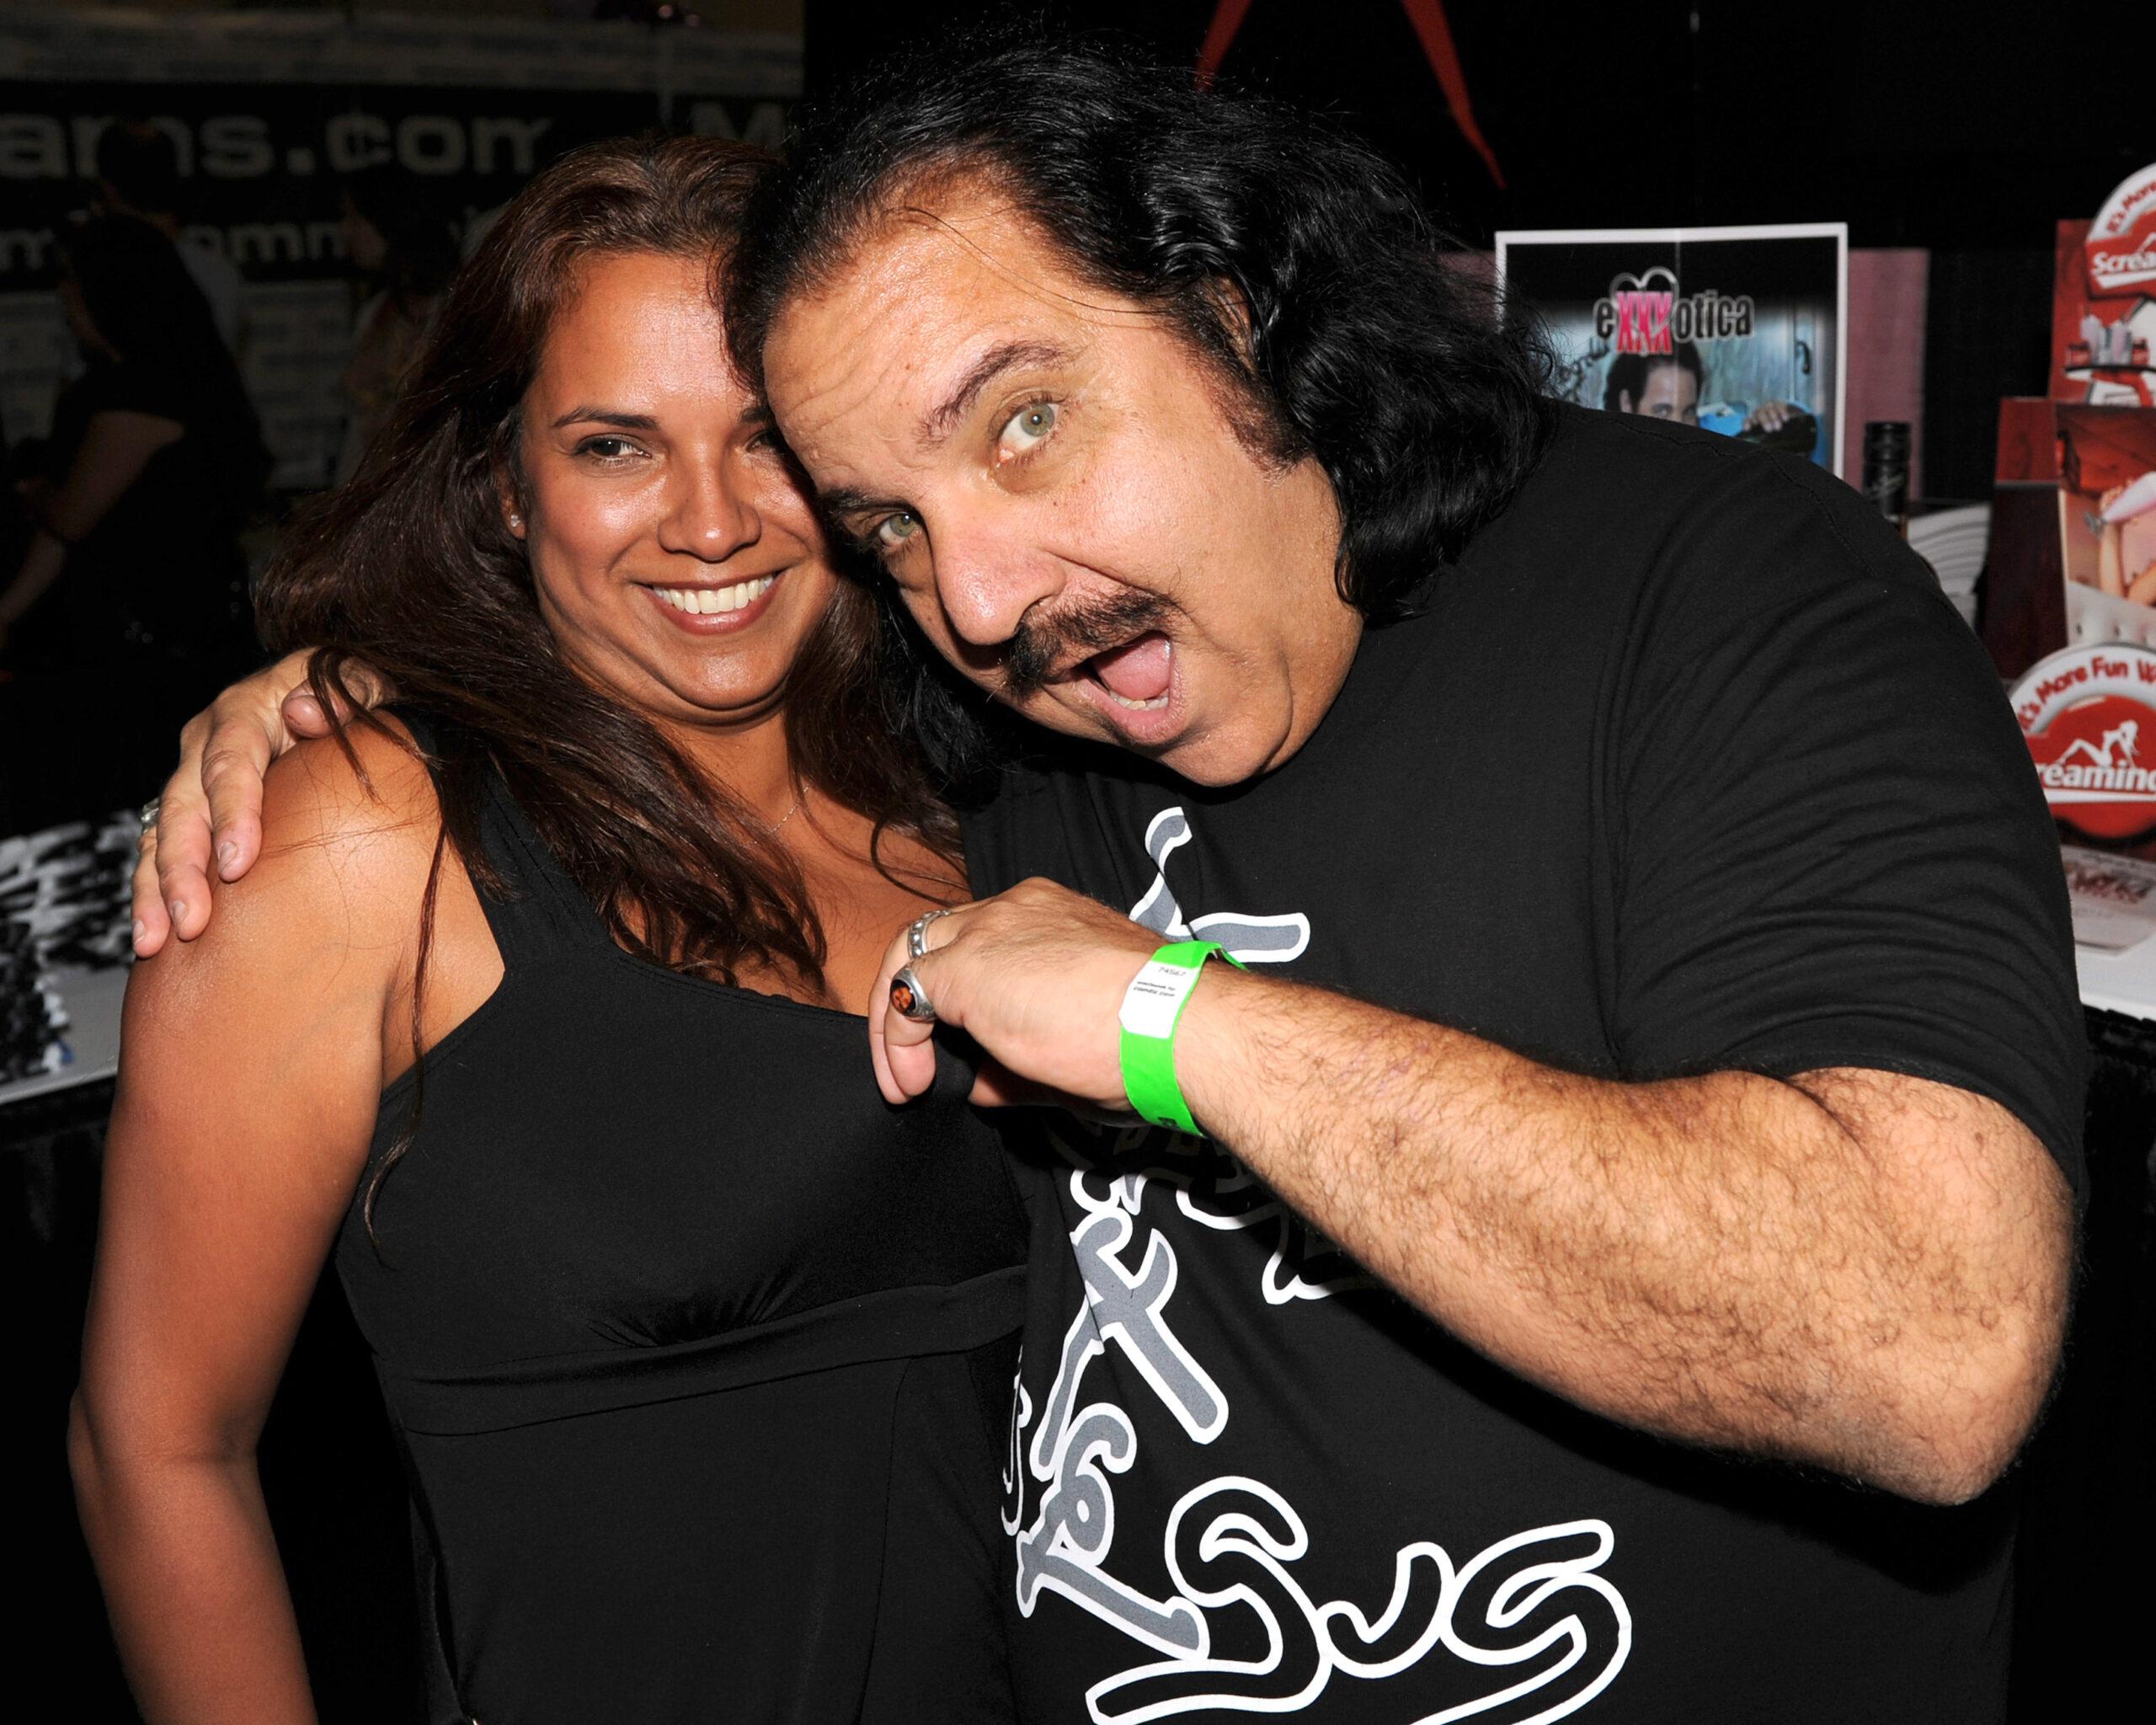 Ron Jeremy Indicted On 30 Charges Of Sexual Assault, Involving 21 Victims